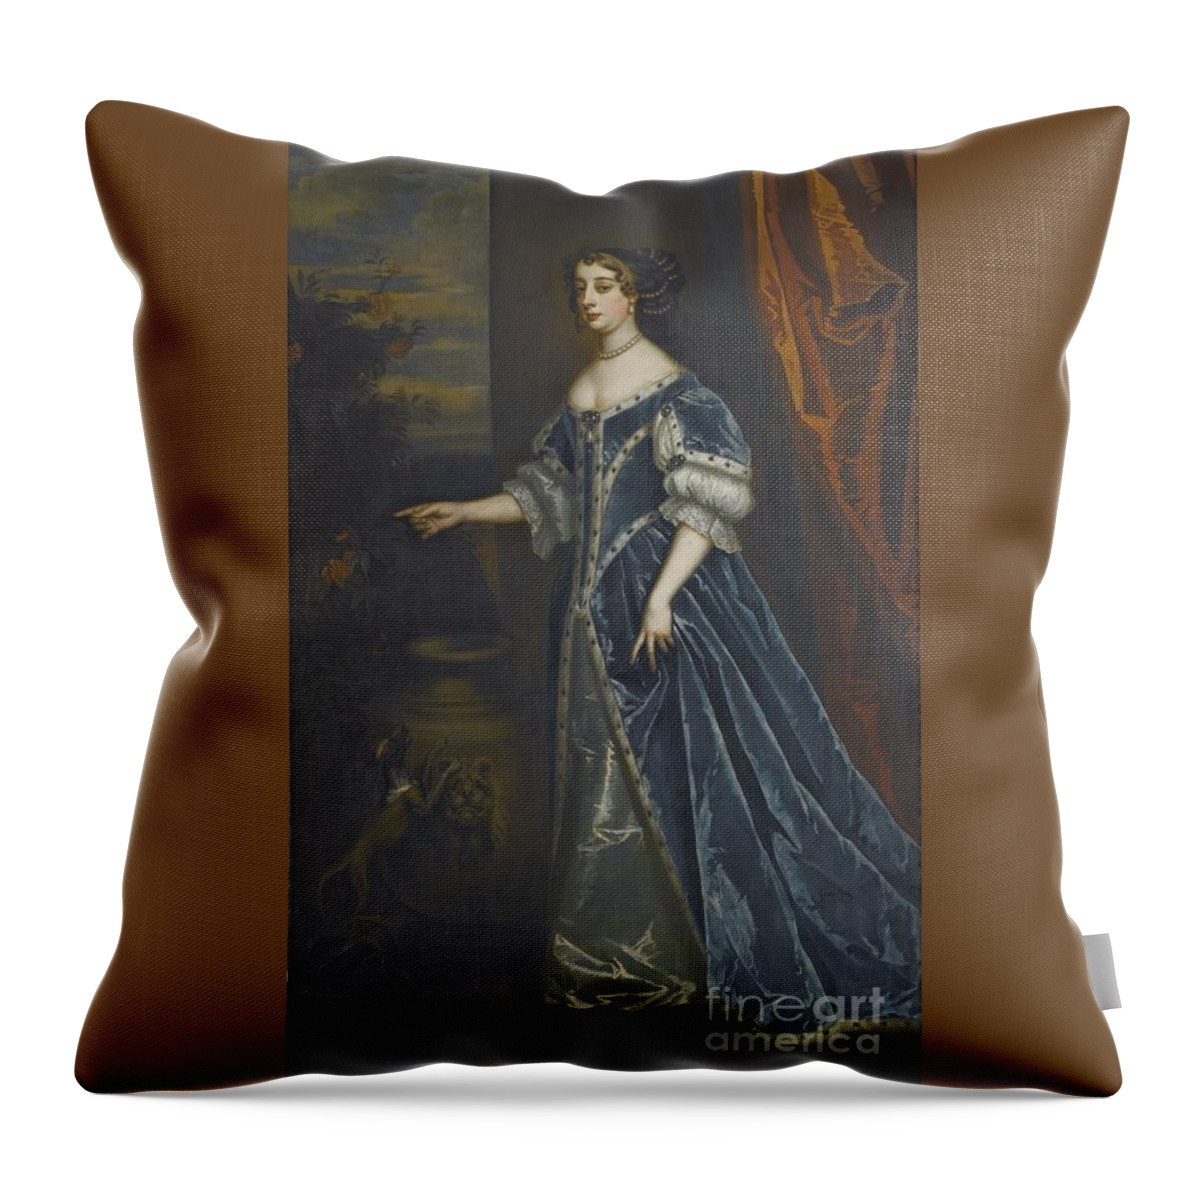 Studio Of Sir Peter Lely Soest 1618 - 1680 London Portrait Of Barbara Villiers Throw Pillow featuring the painting London Portrait Of Barbara Villiers by MotionAge Designs